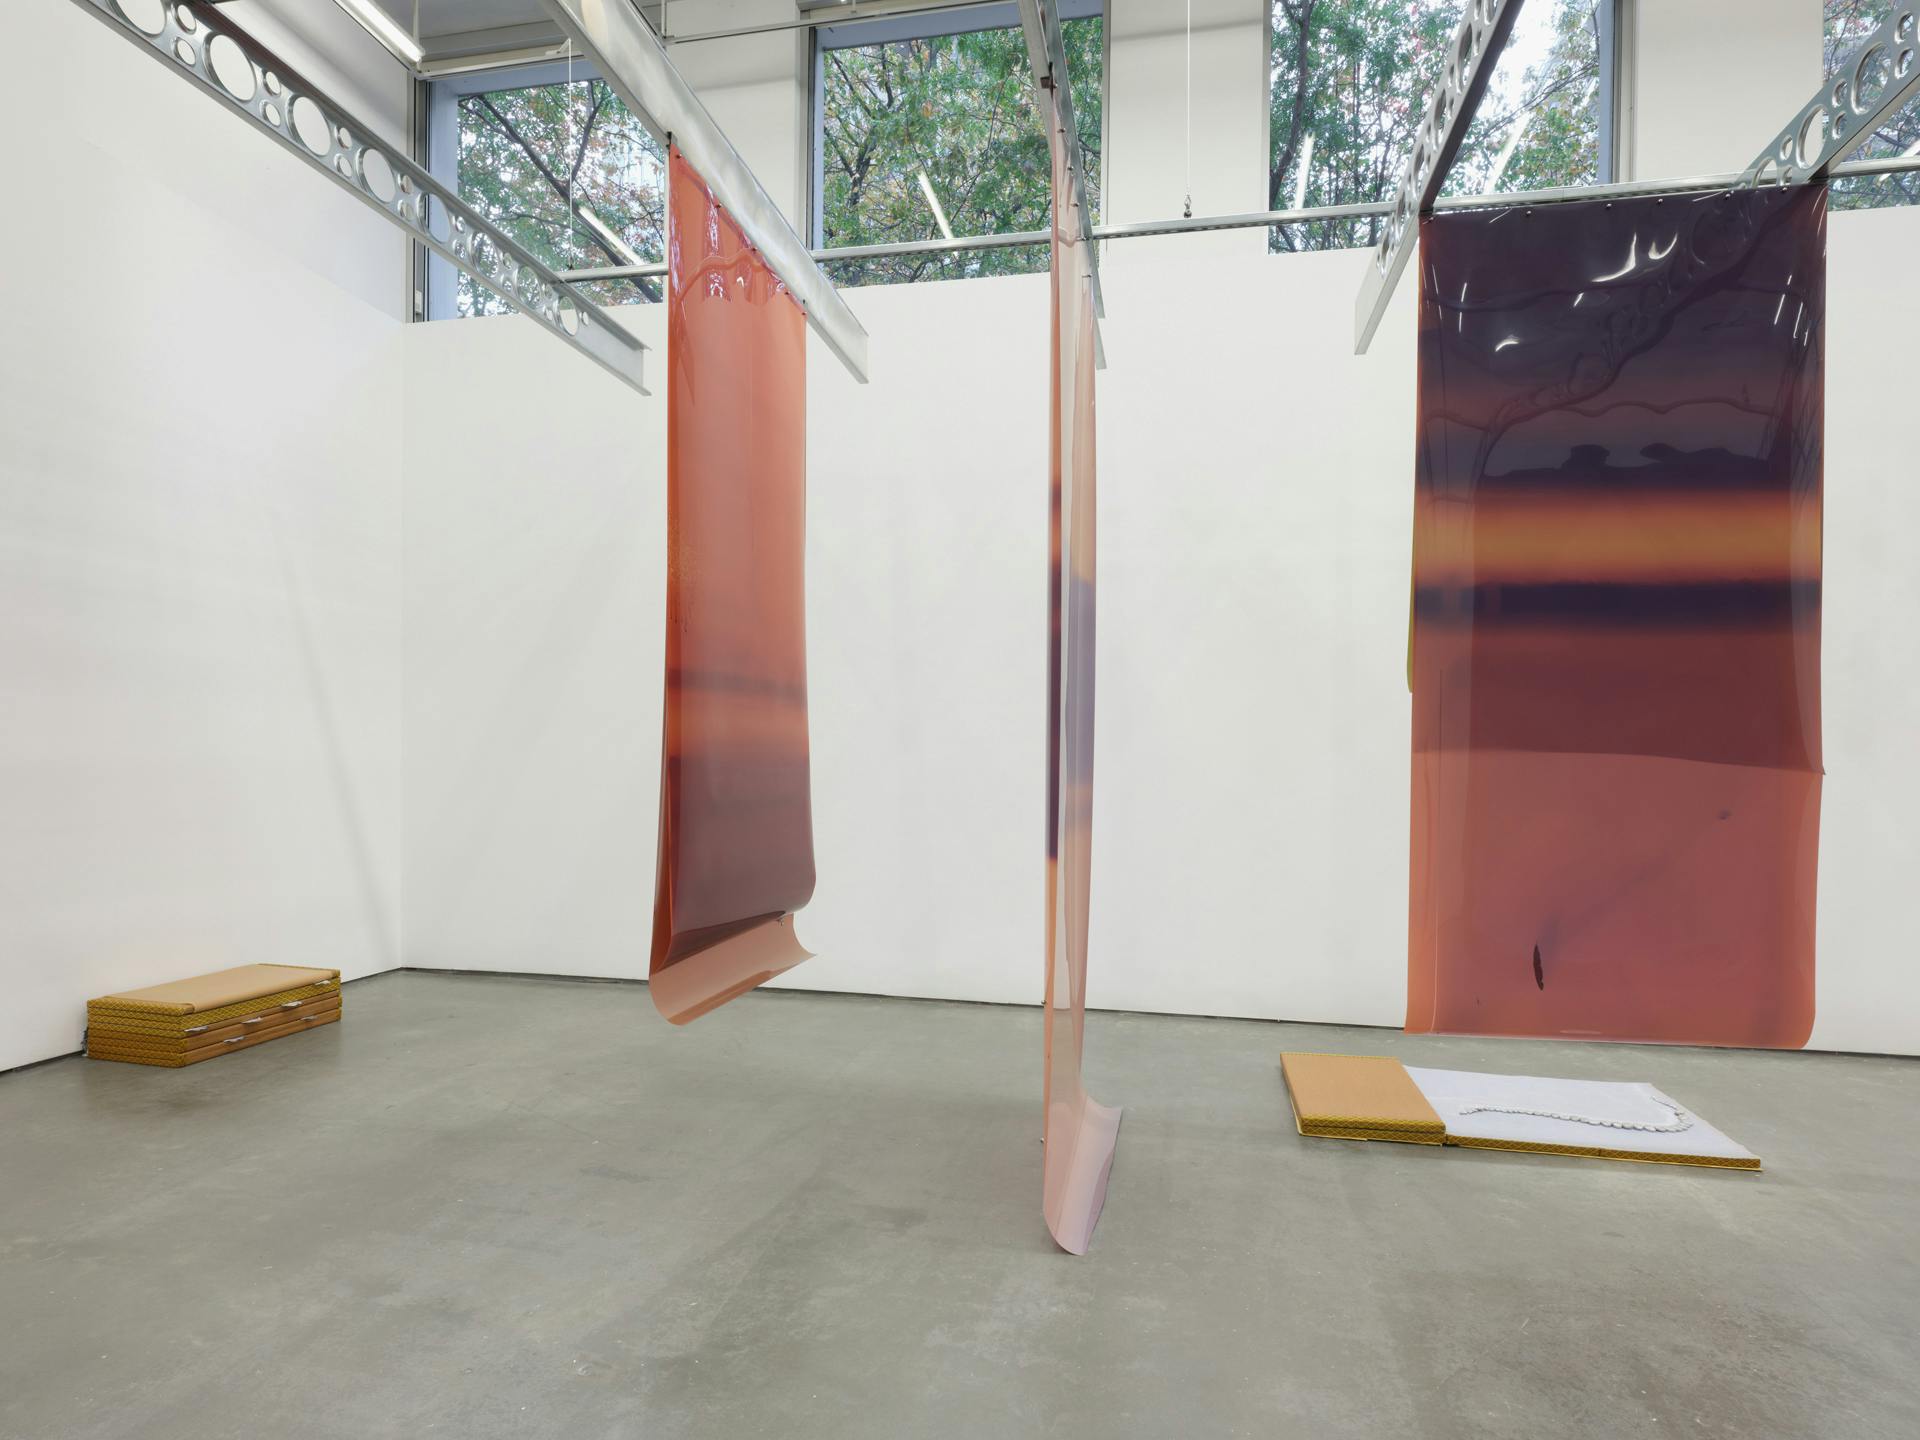 Long earth tone sheets of film of various colours are suspended from industrial metal ceiling beams. Two sculptures, made of tatami mats and cast aluminium objects, sit on the cement floor in the background. Large windows are visible near the ceiling.